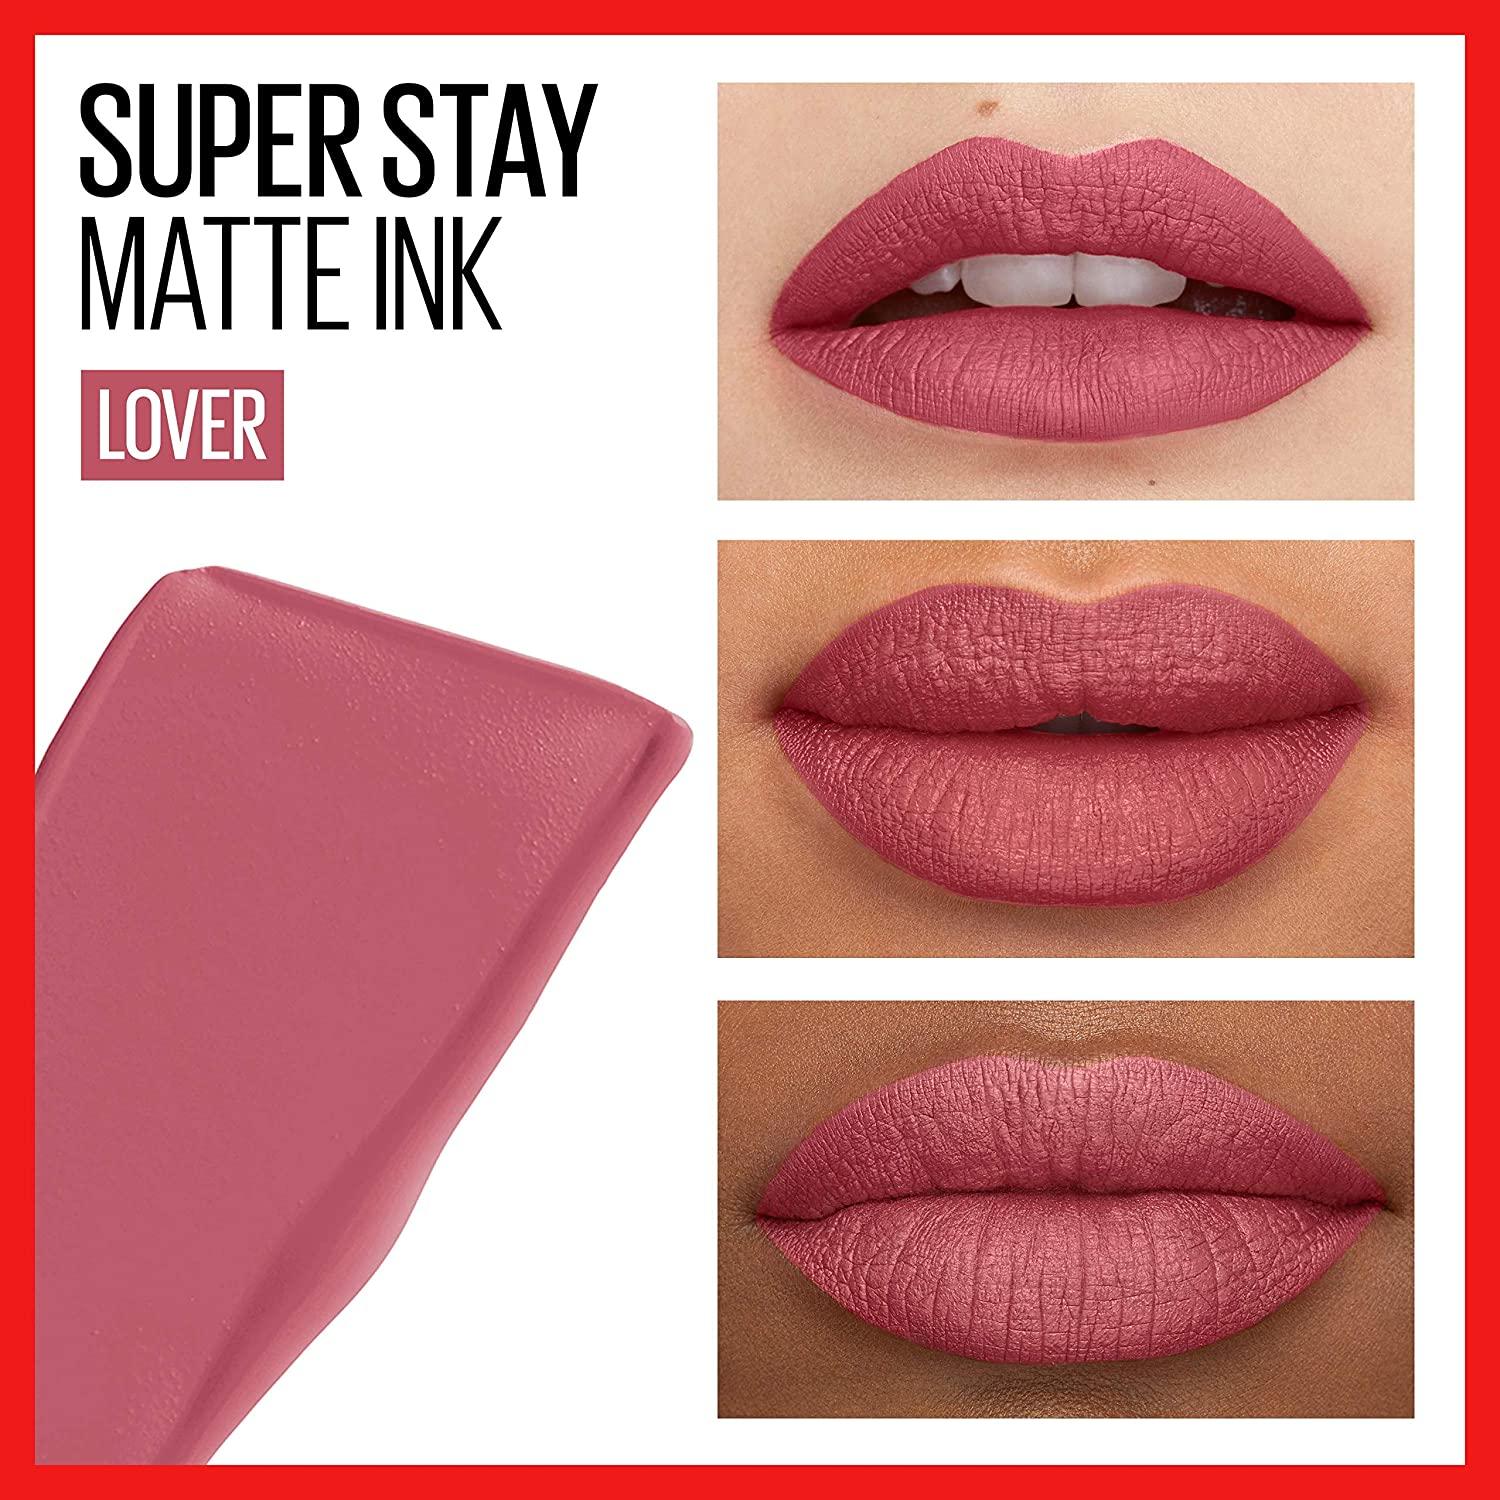 Maybelline New York Super Stay Matte Ink Liquid Lipstick, Transfer Proof,  Long Lasting, Limited Edition Birthday Cake Scented Shades, Show Runner